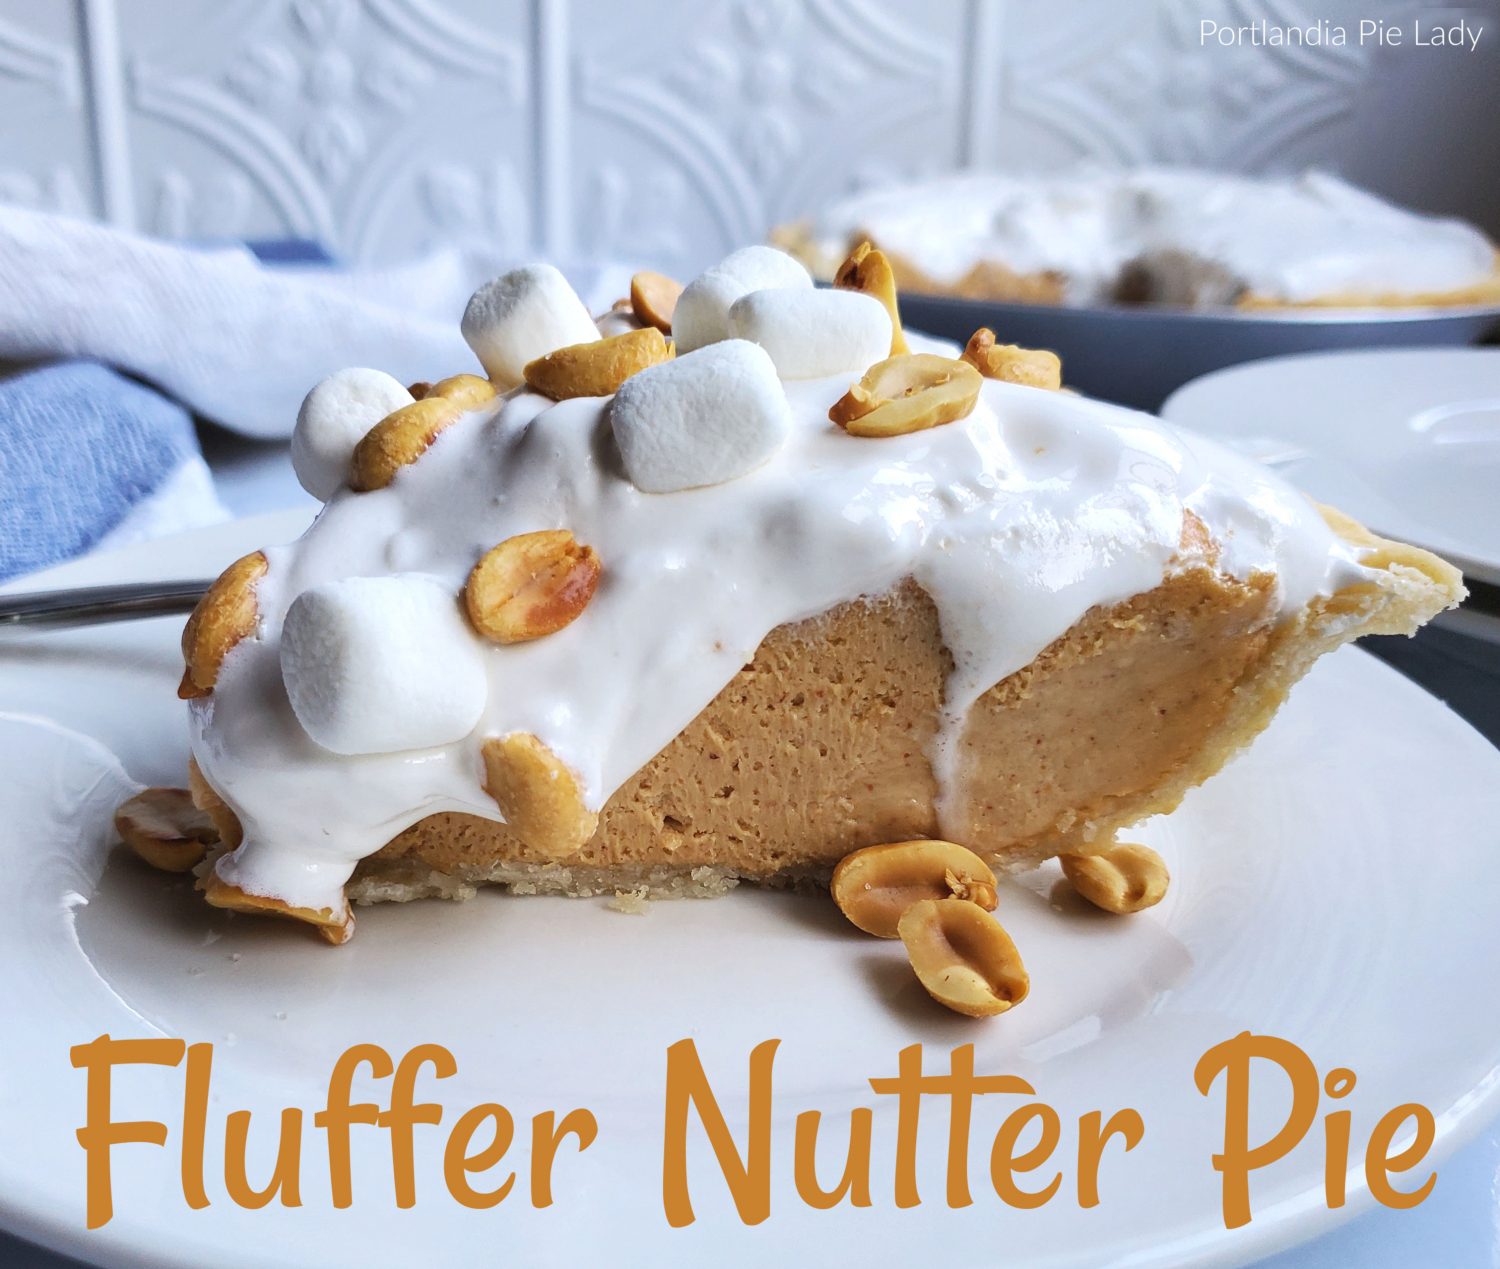 Fluffer Nutter Pie: Old-fashioned creamy peanut butter filling topped with creamy marshmallow fluff "icing" and roasted salted peanuts. Good stuff.